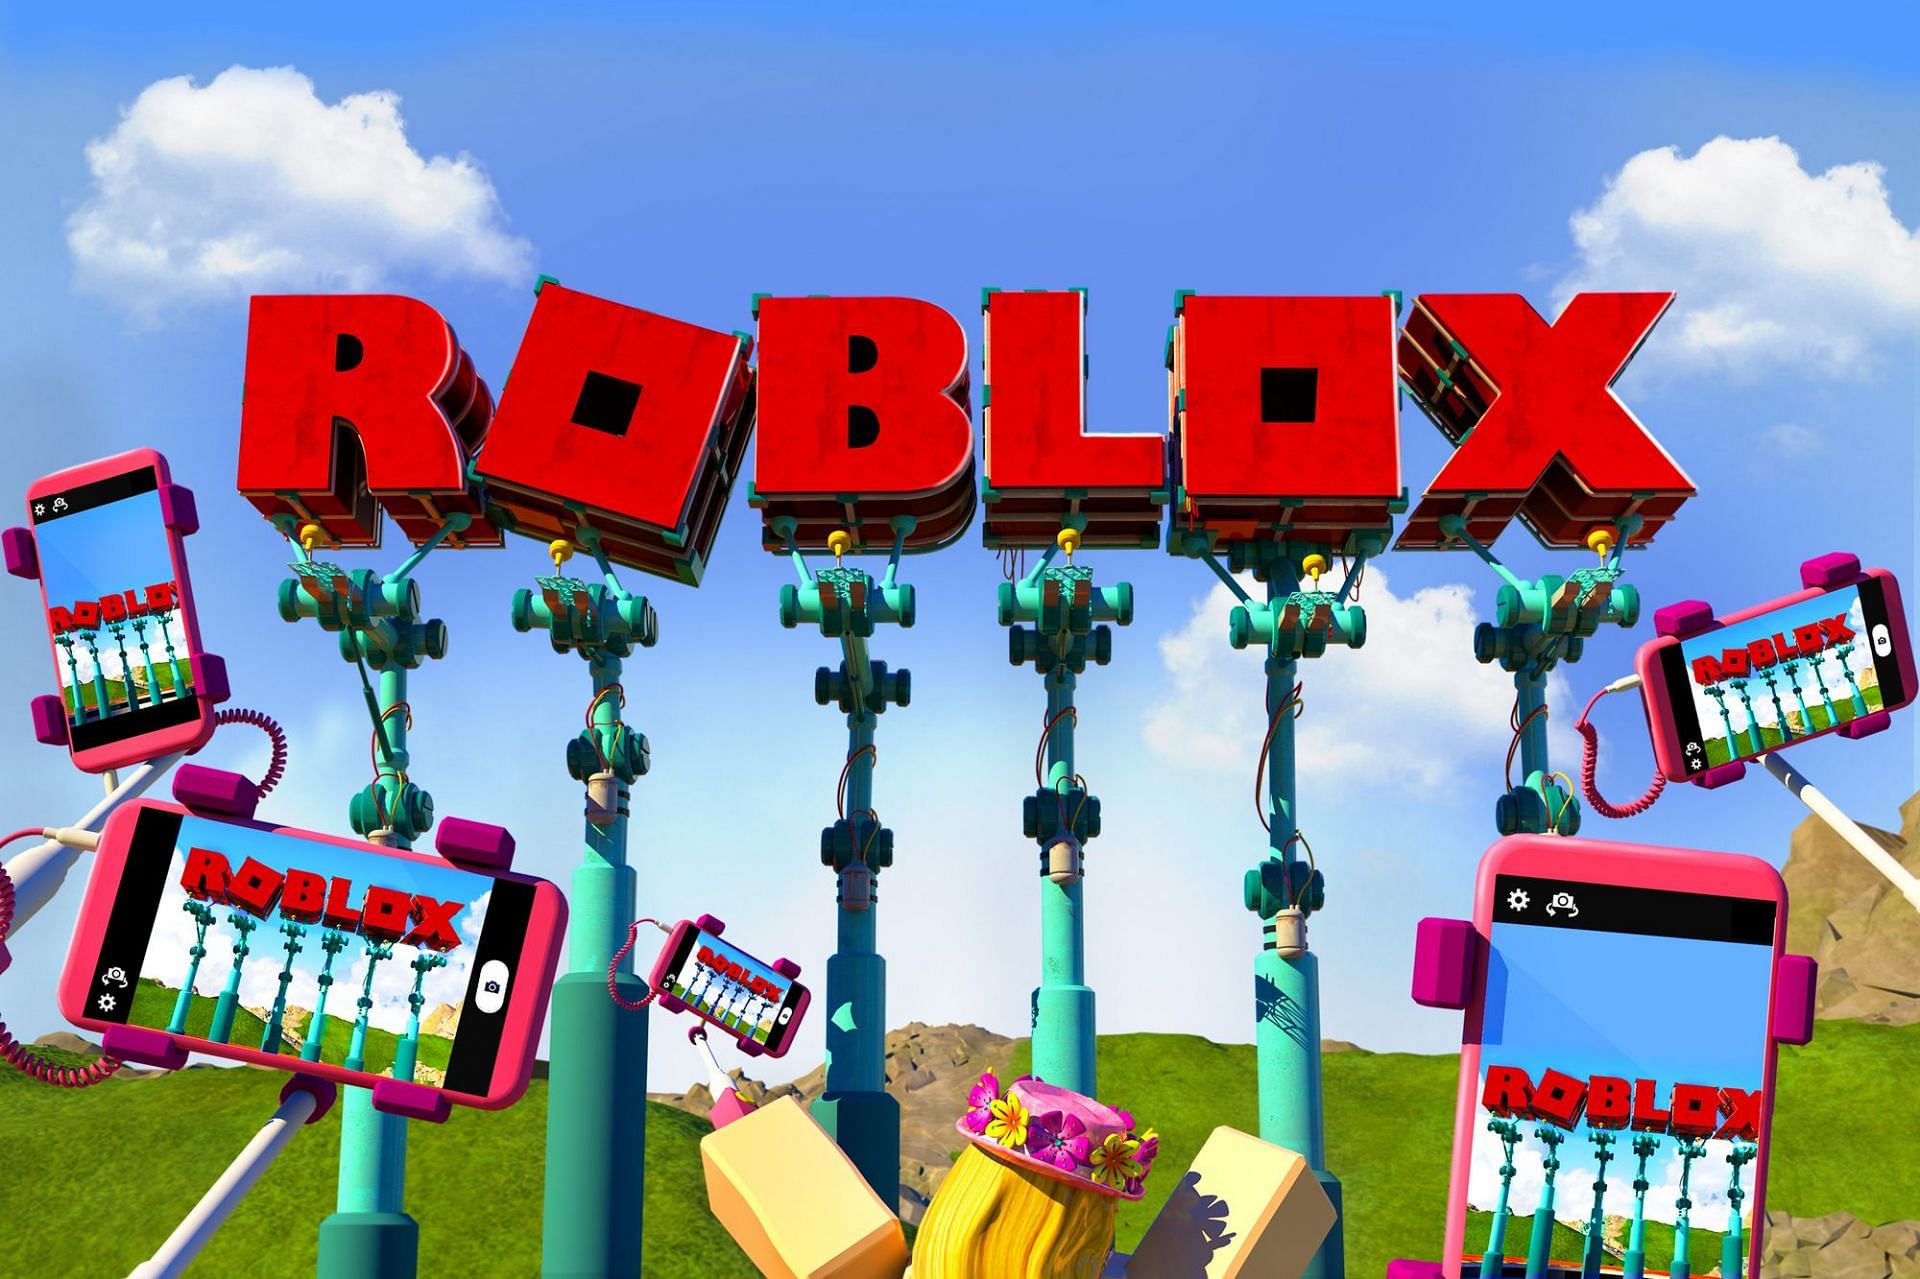 Most popular Roblox games in 2022